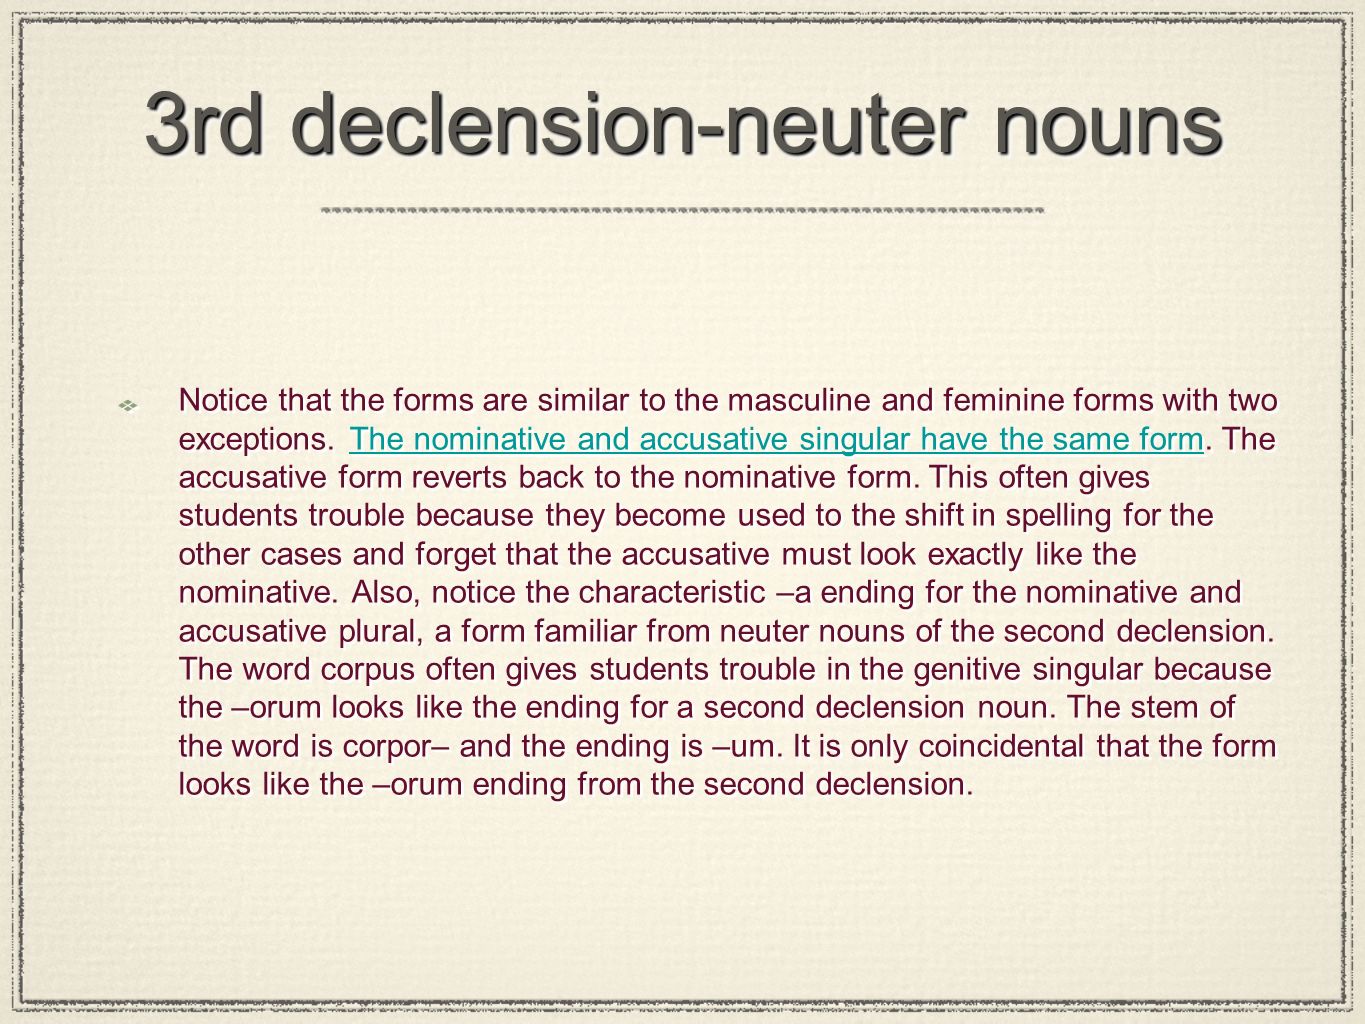 3rd declension-neuter nouns Notice that the forms are similar to the masculine and feminine forms with two exceptions.